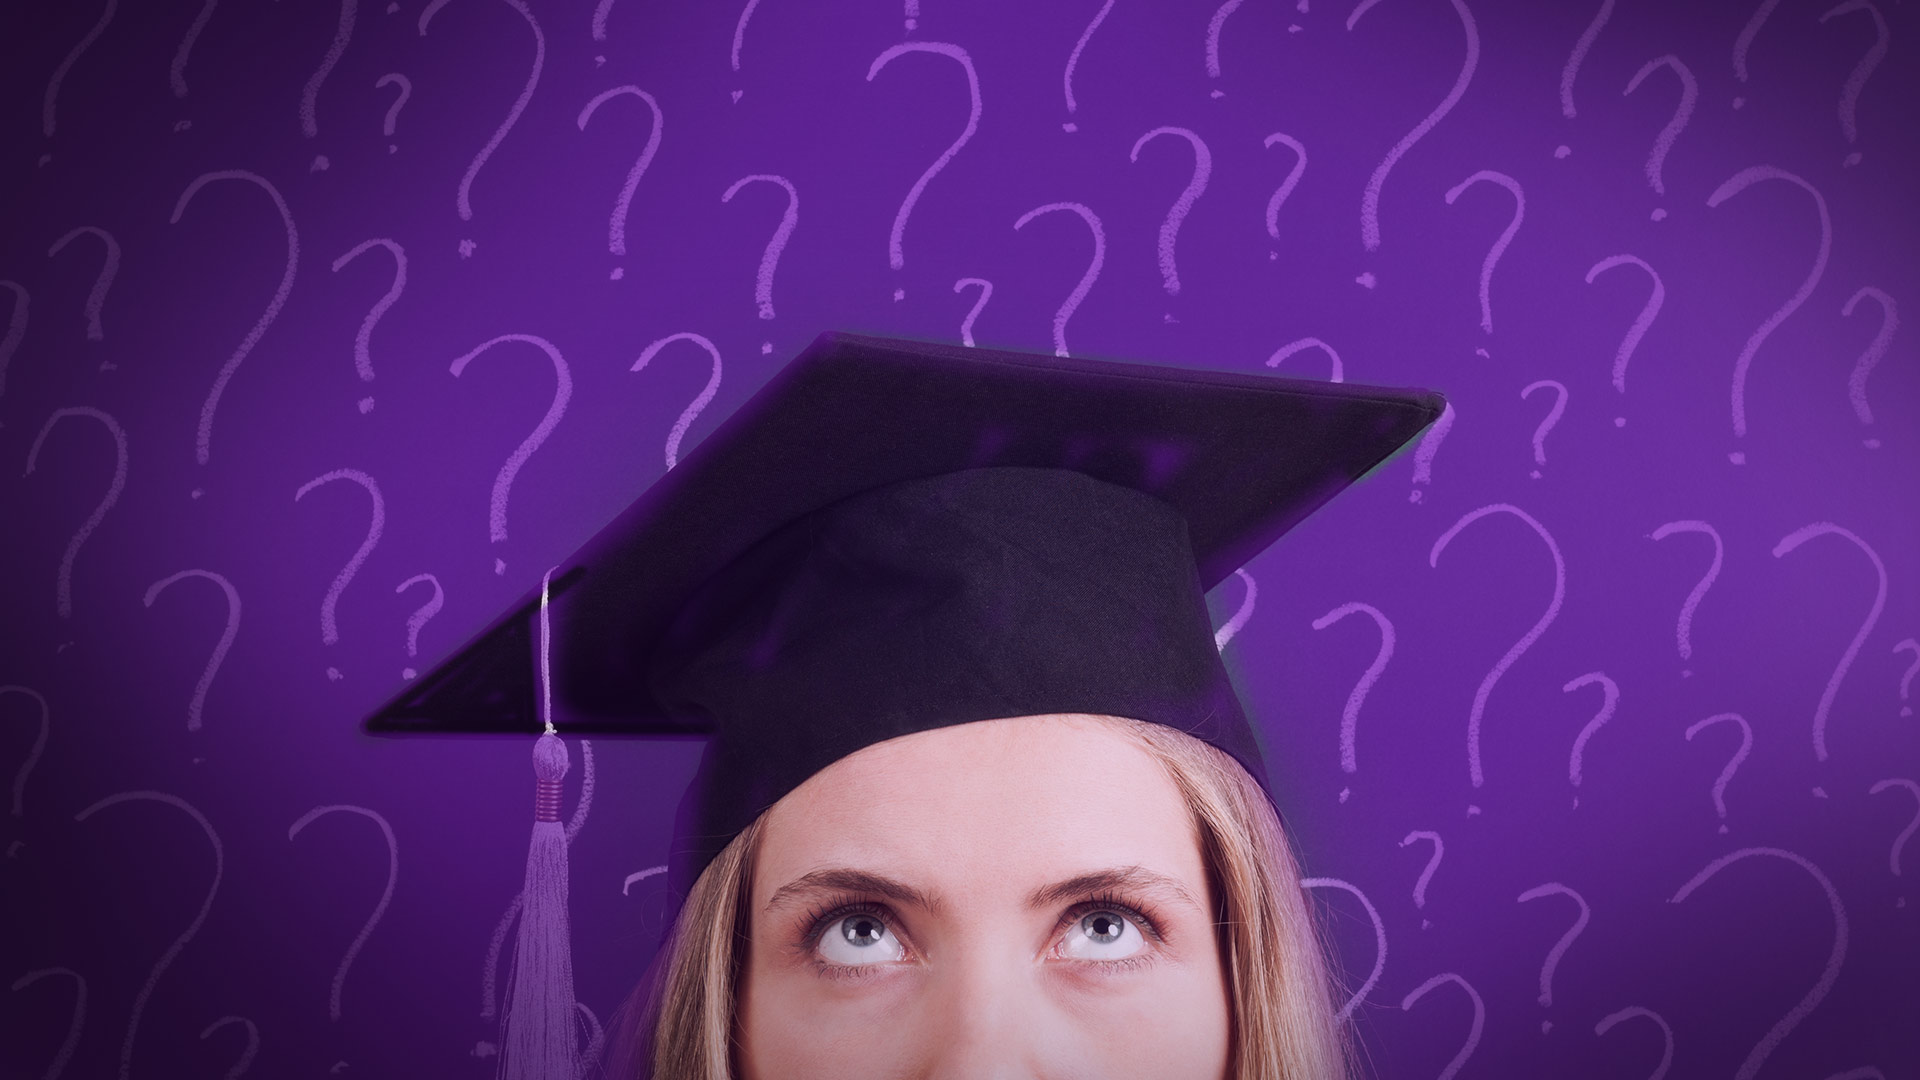 Student with graduation hat on with question marks above her head